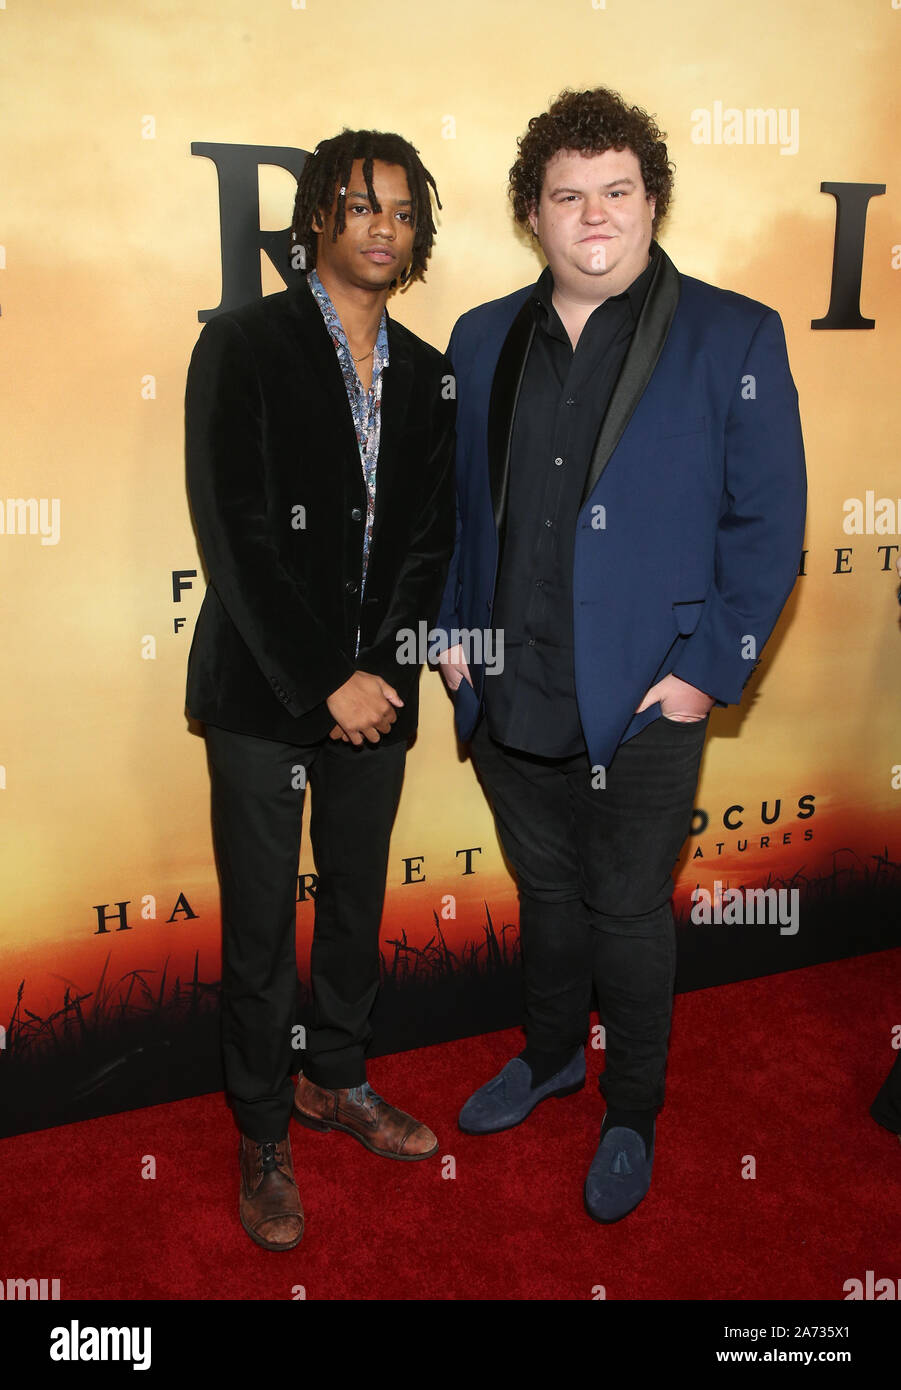 Los Angeles, Ca. 29th Oct, 2019. Henry Hunter Hall, Guest, at the Los Angeles Premiere of Harriet at The Orpheum in Los Angeles, California on October 29, 2019. Credit: Faye Sadou/Media Punch/Alamy Live News Stock Photo